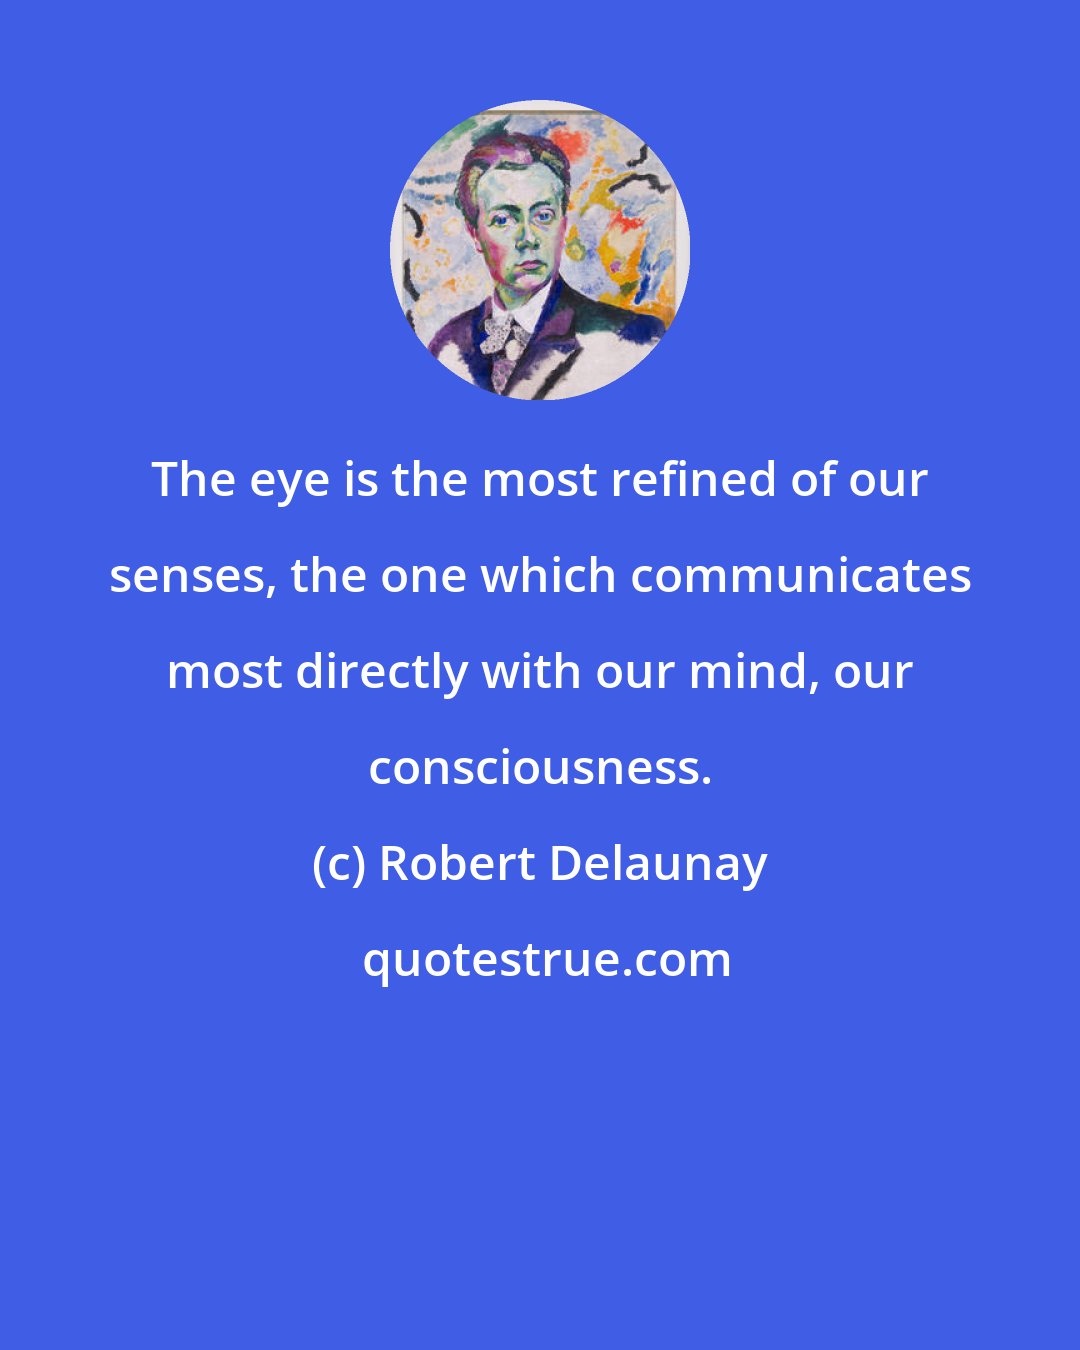 Robert Delaunay: The eye is the most refined of our senses, the one which communicates most directly with our mind, our consciousness.